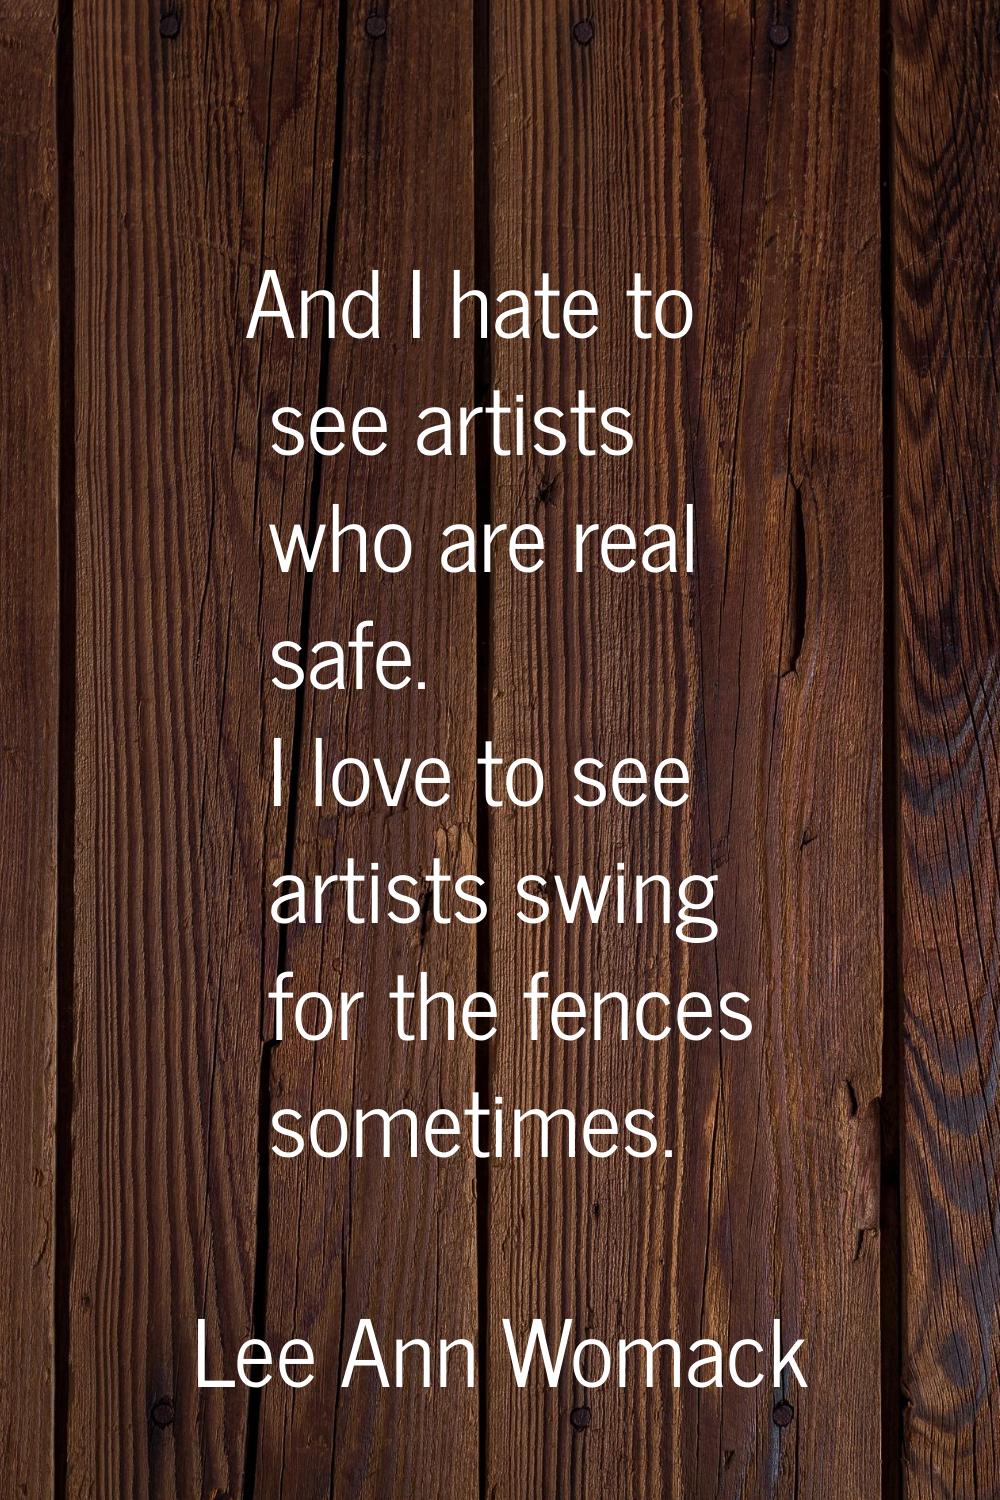 And I hate to see artists who are real safe. I love to see artists swing for the fences sometimes.